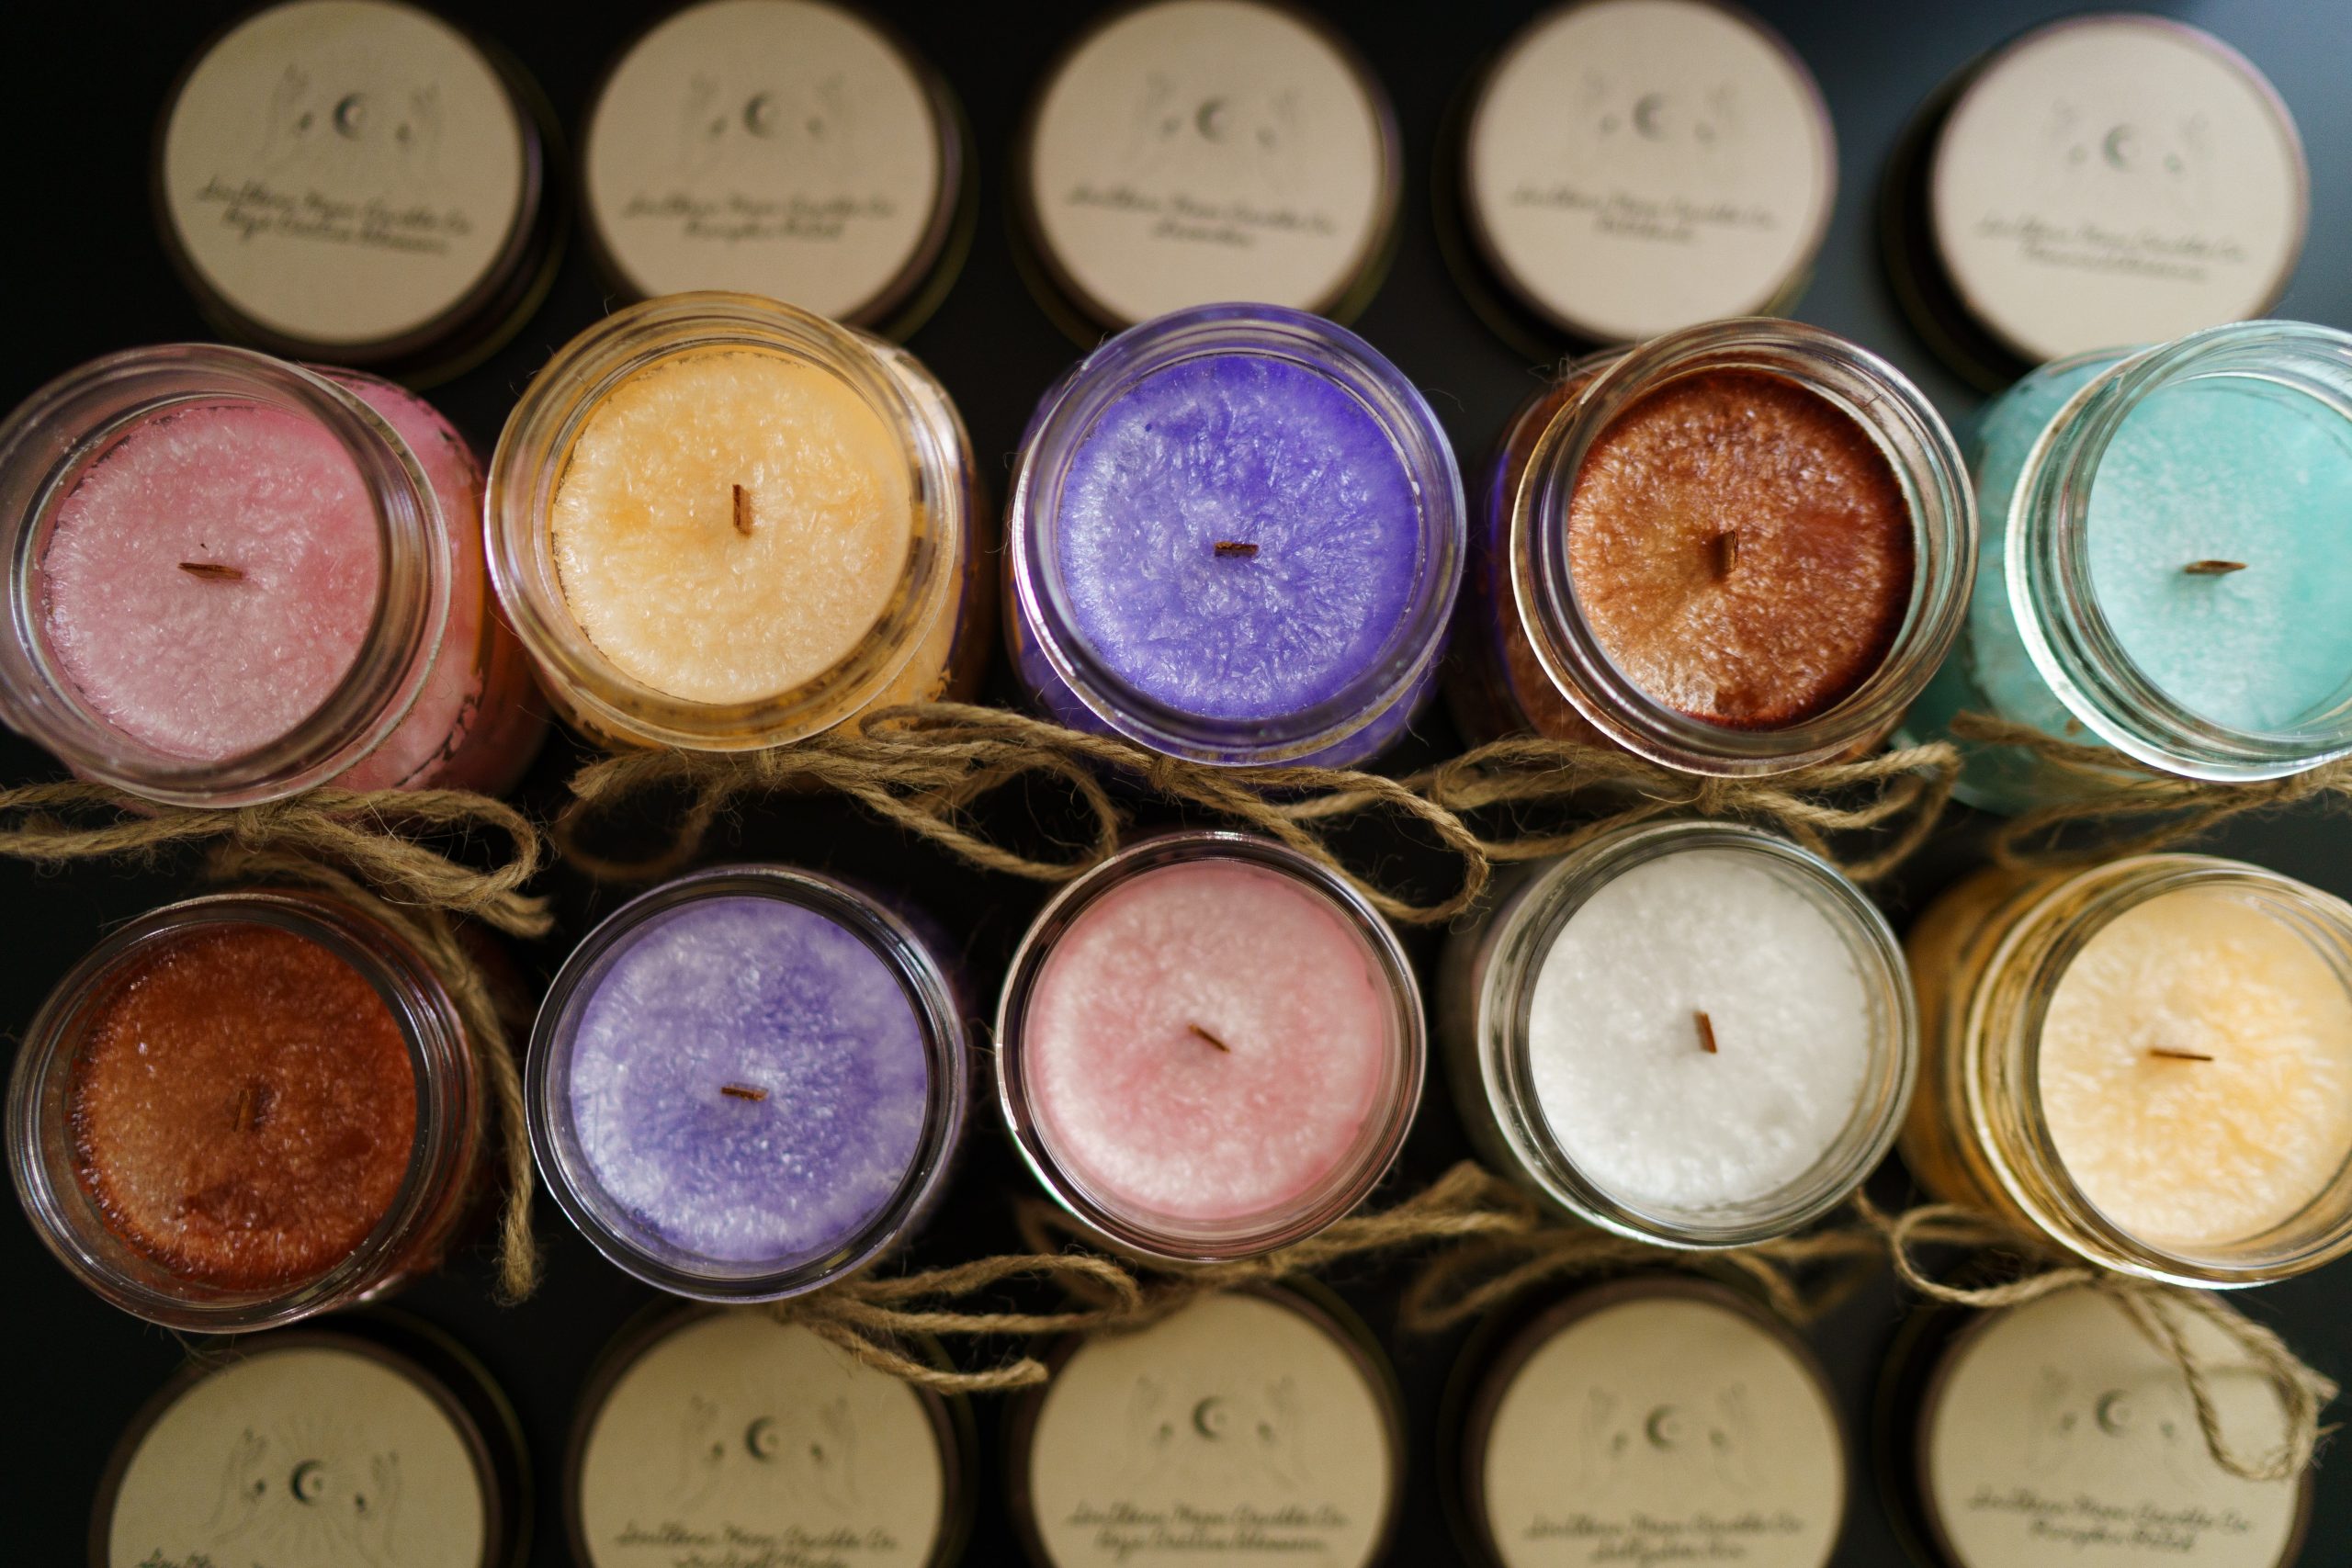 Learn How to Make Candles in Fun and Relaxing Workshops